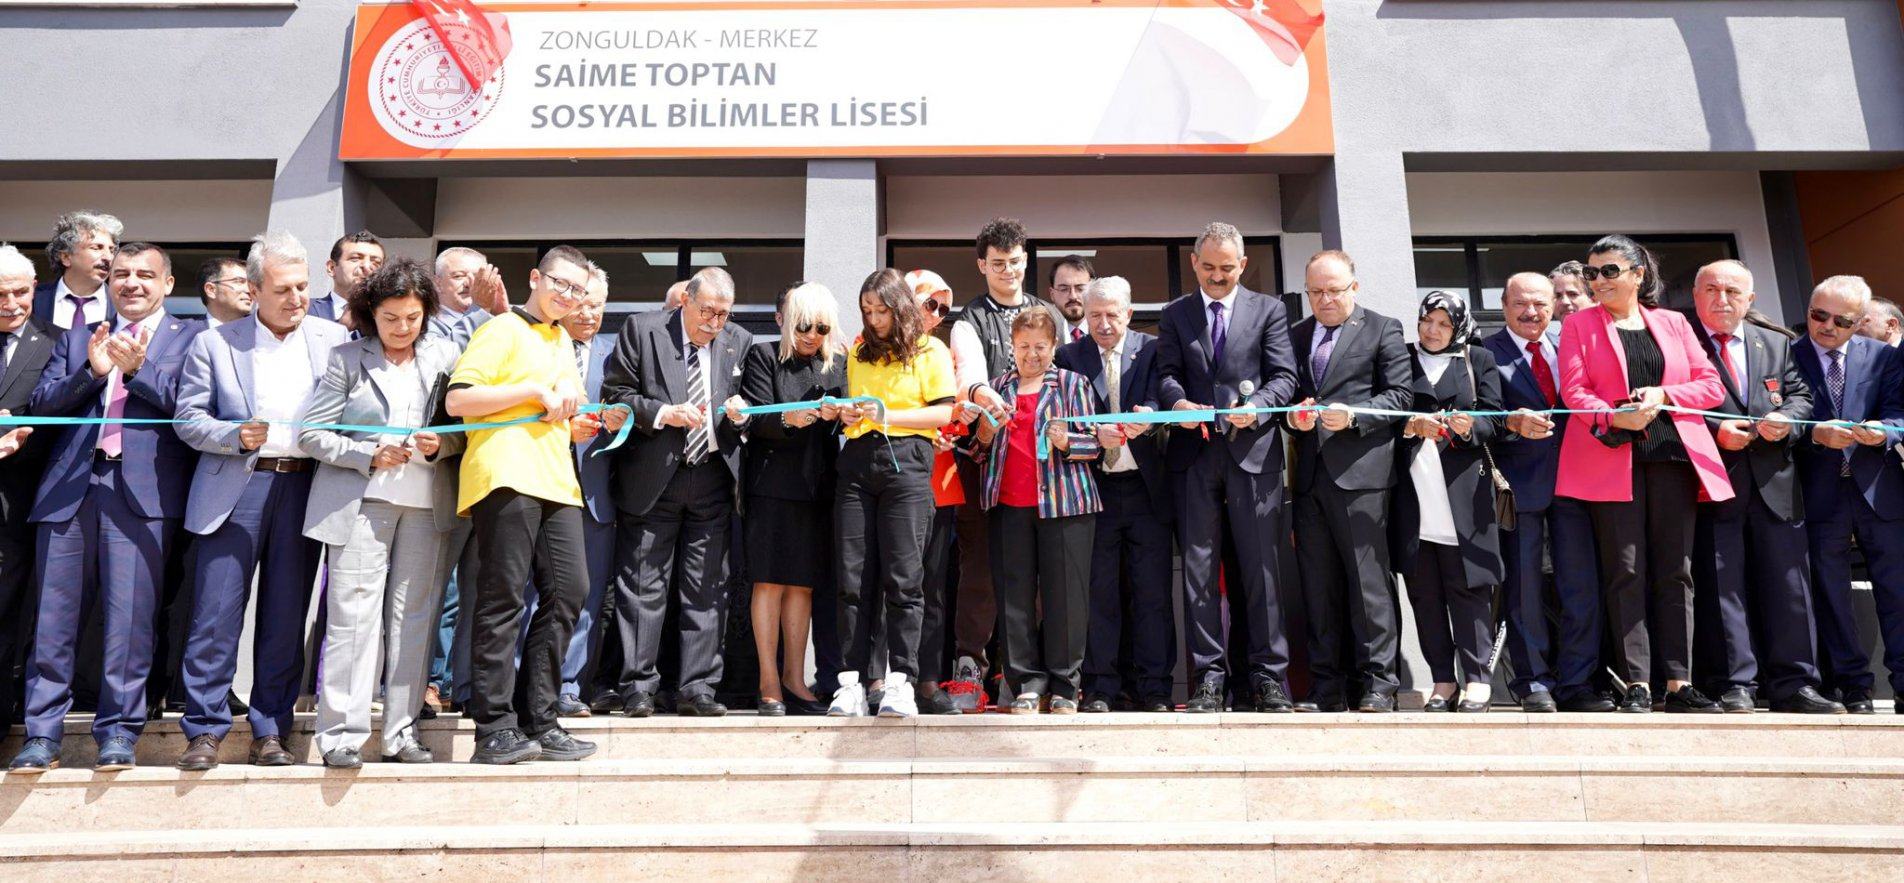 MINISTER ÖZER ATTENDED THE INAUGURATION OF SOCIAL SCIENCE HIGH SCHOOL IN ZONGULDAK